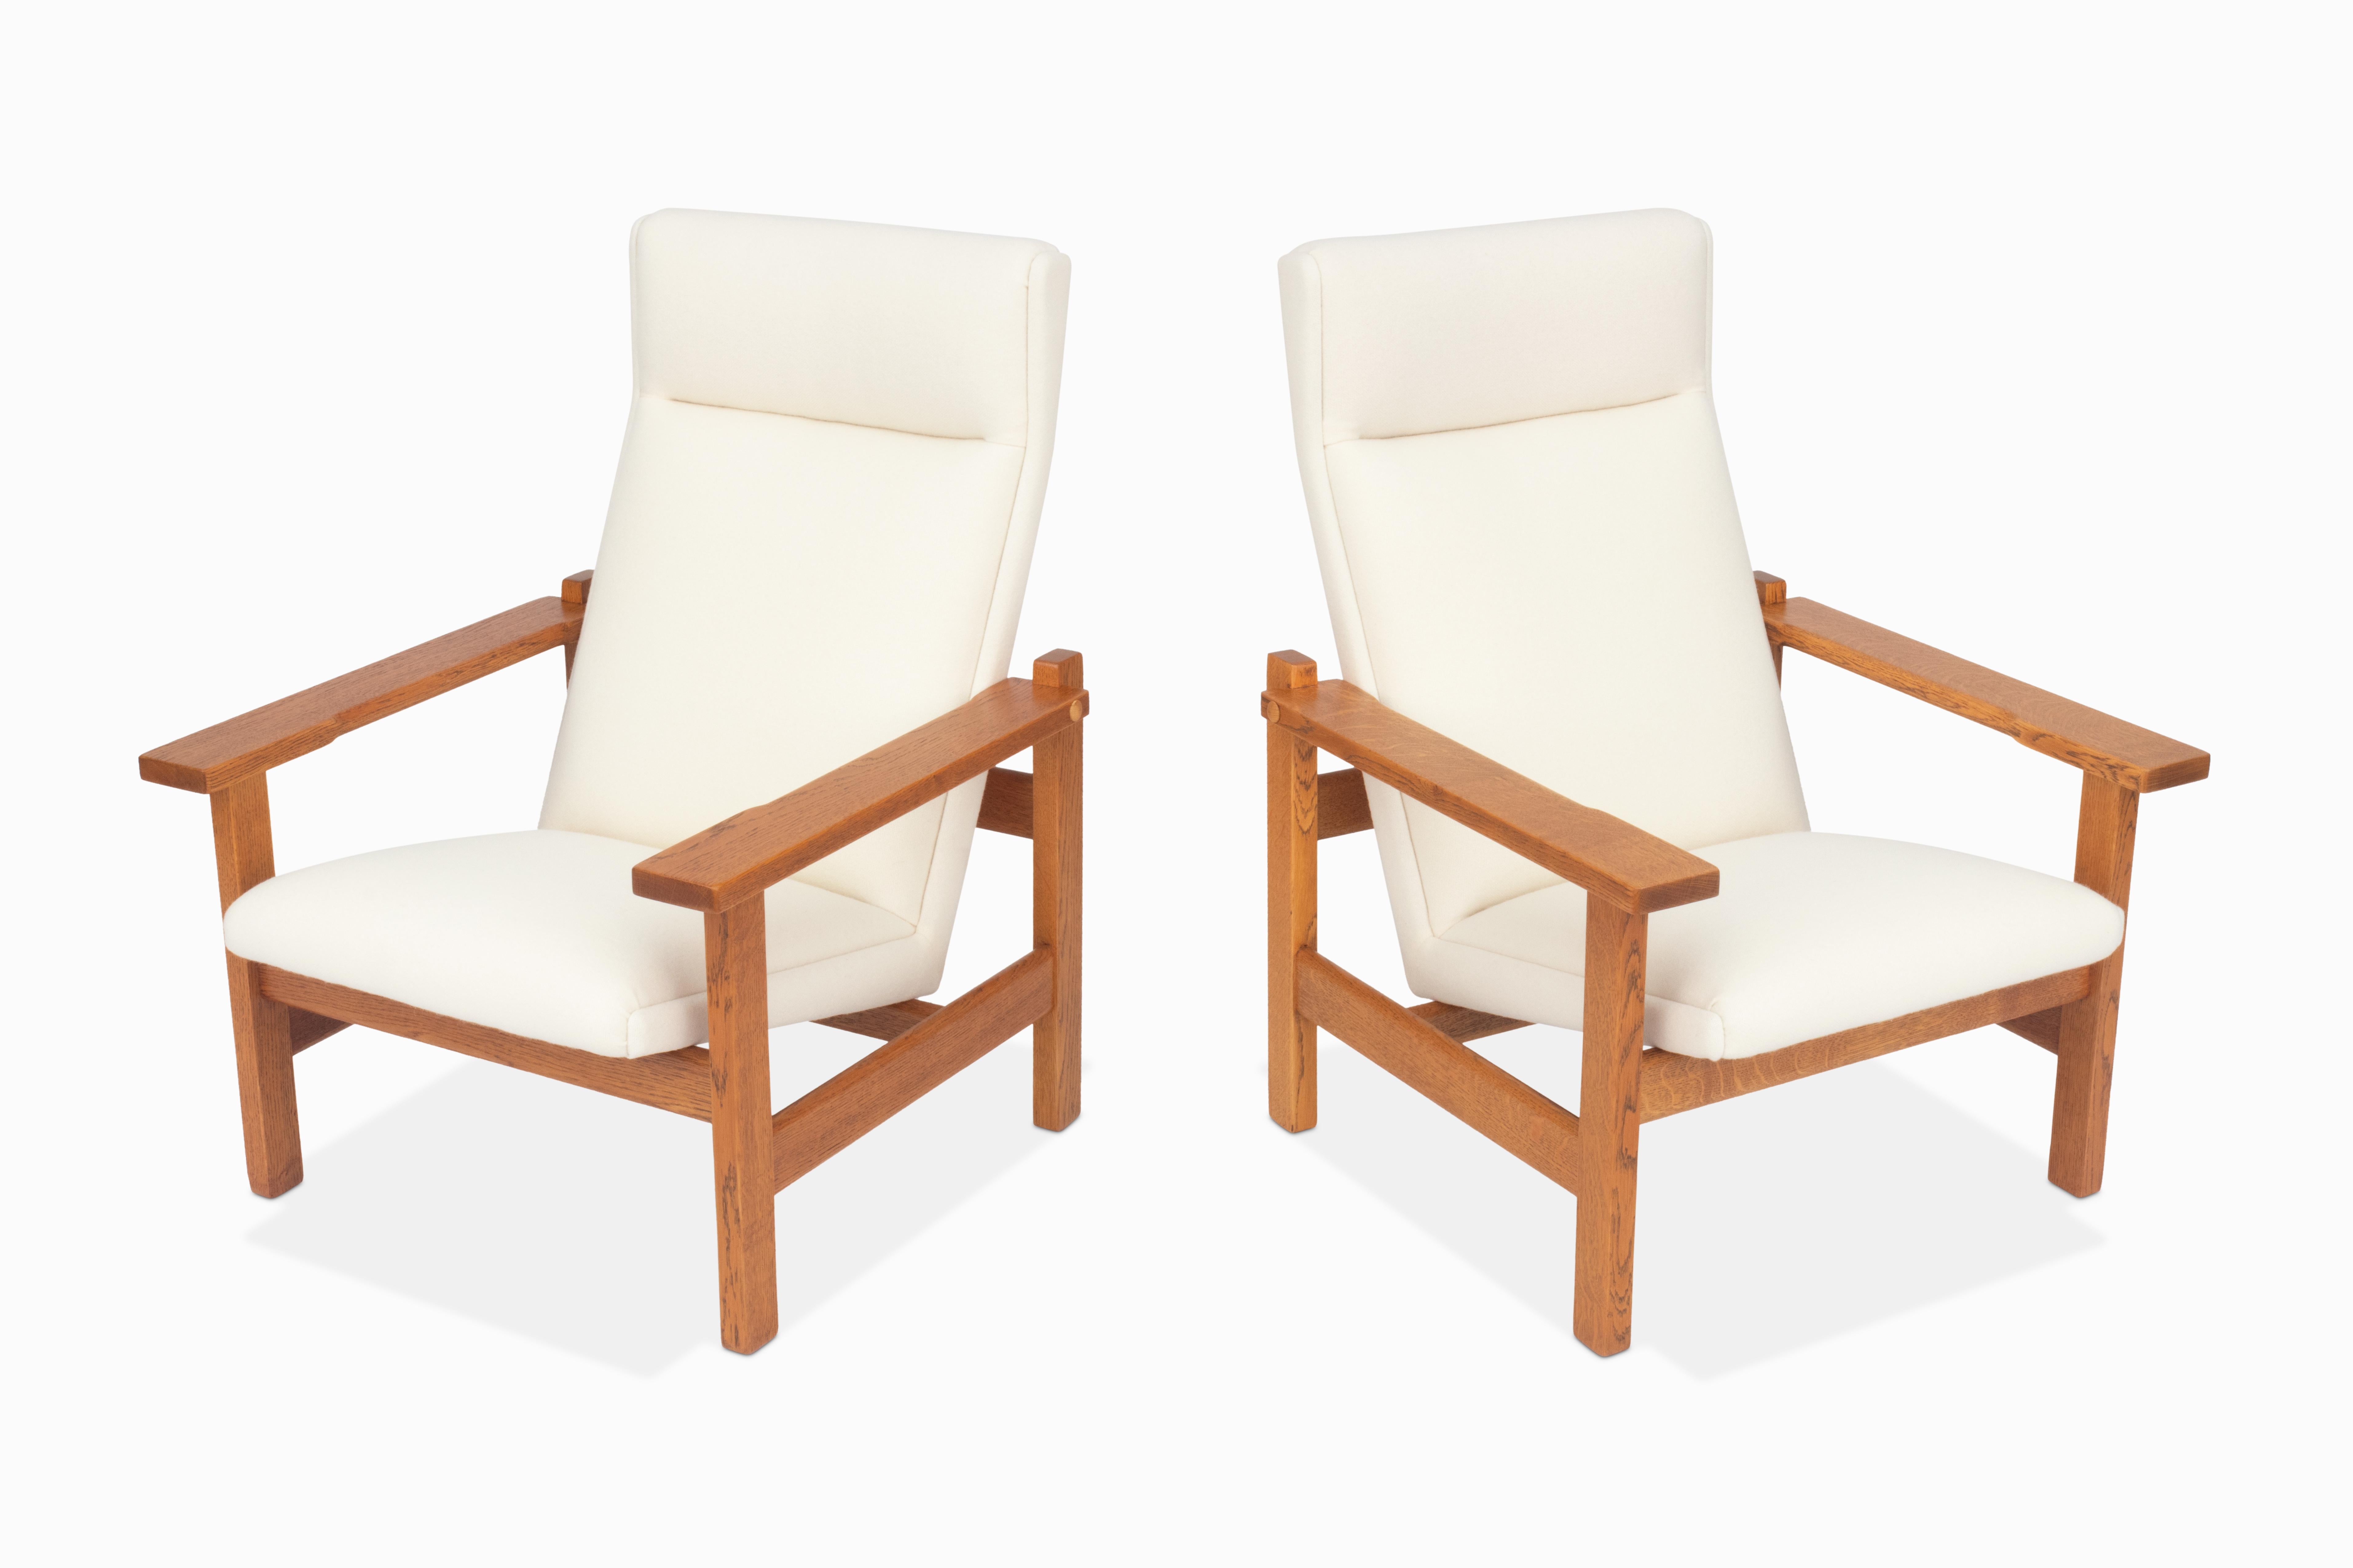 Here is a pair of large highback lounge chairs by Hans Wegner. These chairs are equally as beautiful as they are rare! Very uncommon in the United States. They feature gorgeous quarter sawn oak frames and new Kvadrat Tonus wool upholstery. Both